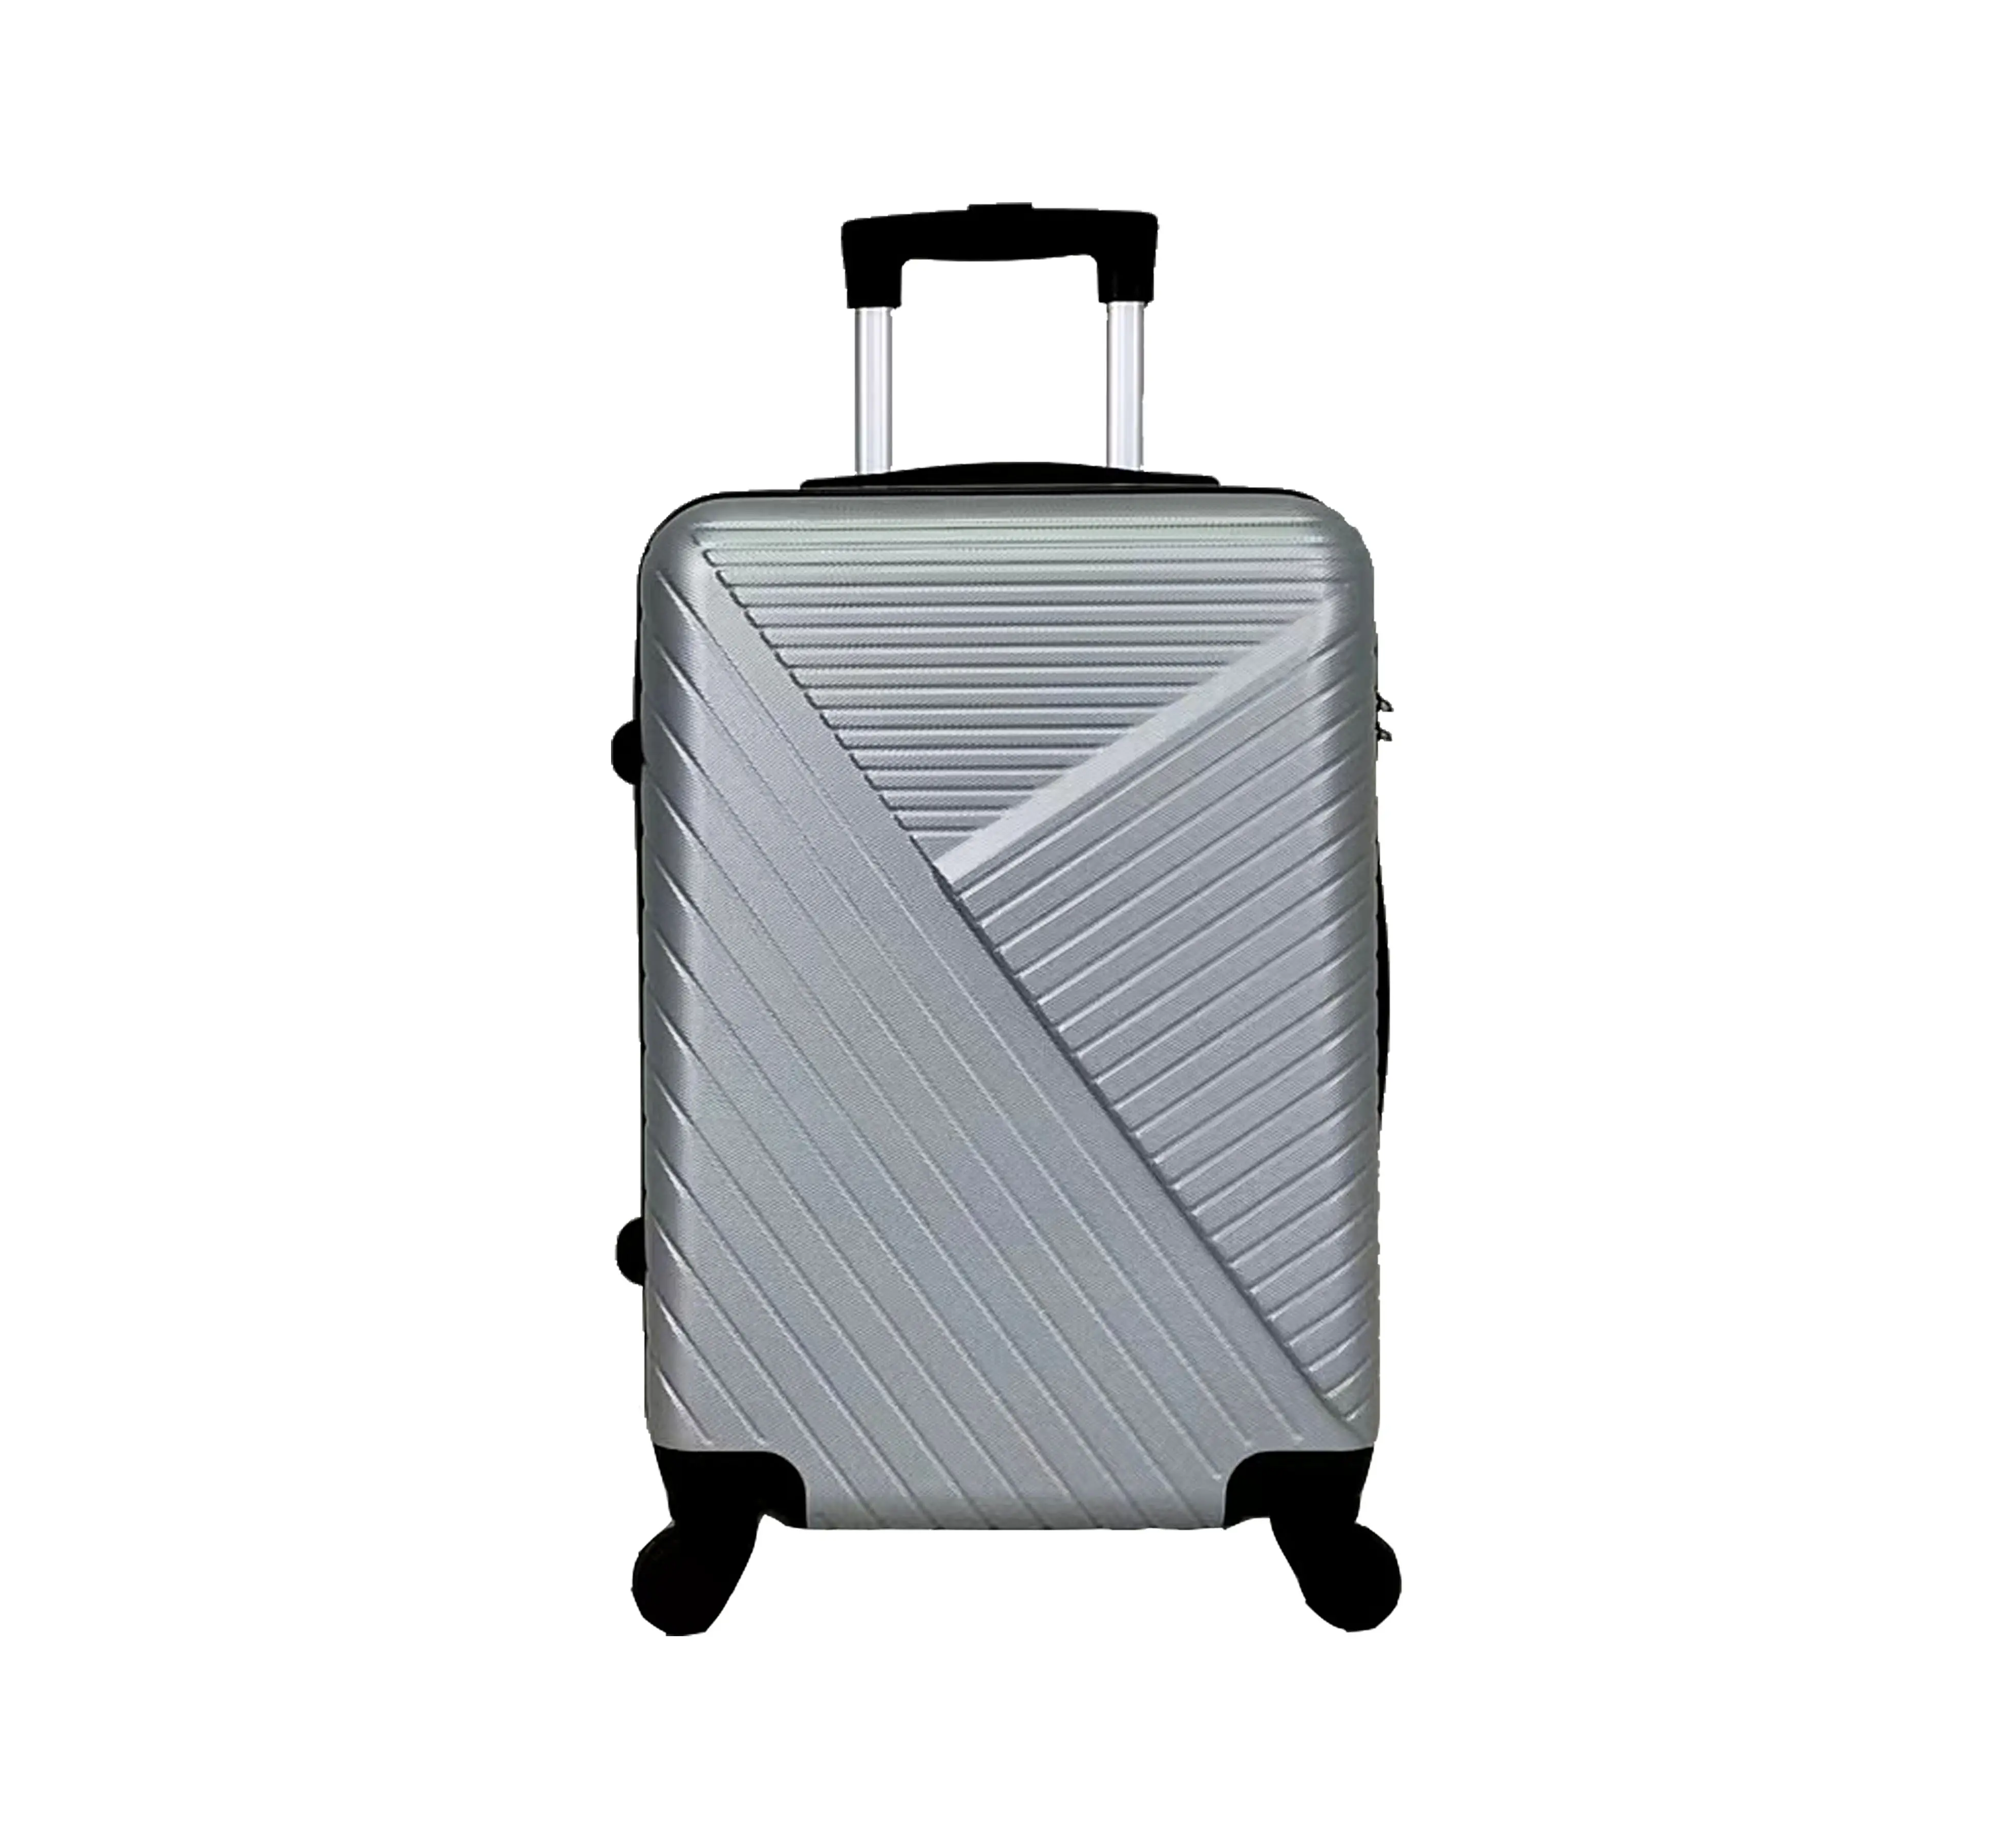 20 24 28 inch Hot Selling Large Capacity ABS Luggage Wear-Resistance Hardside travel Lightweight Suitcase with Telescopic Handle